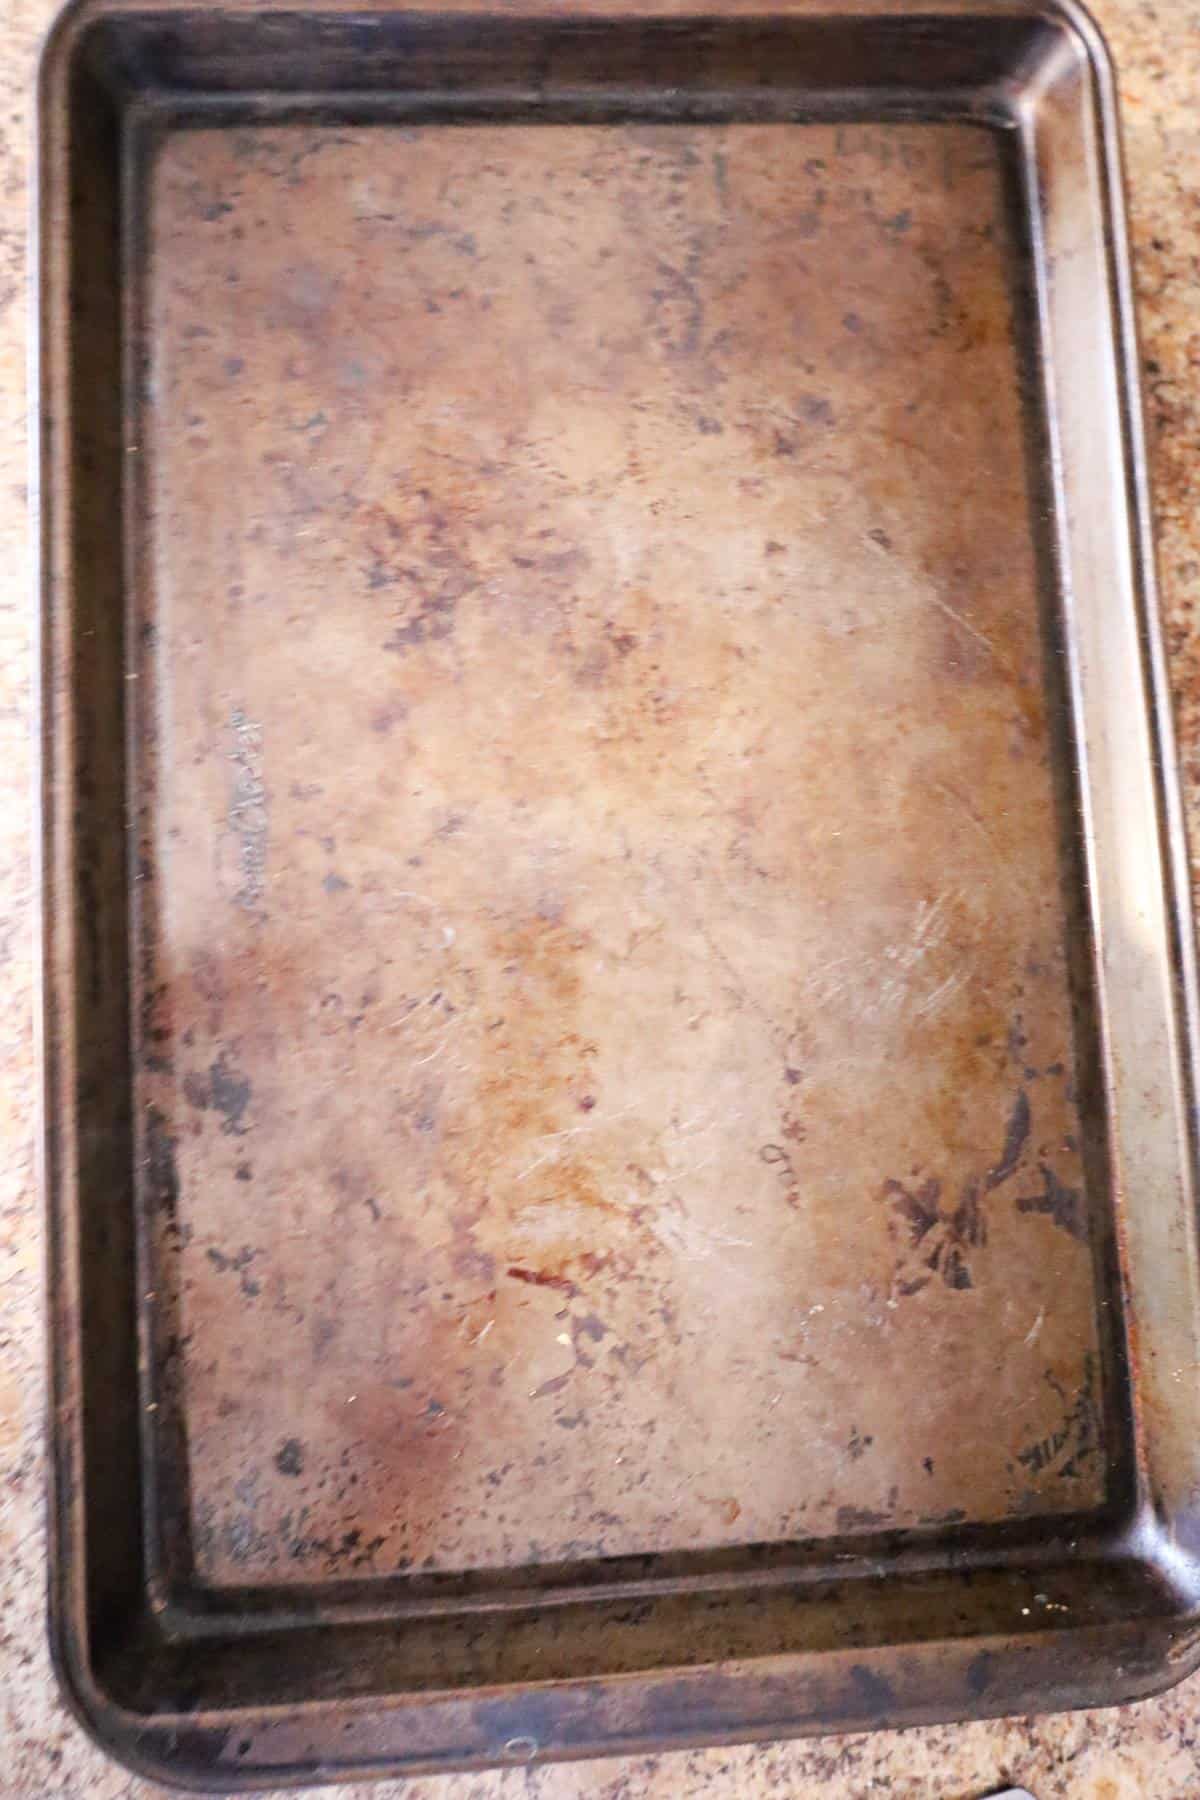 baking sheet on top of French bread loaf halves